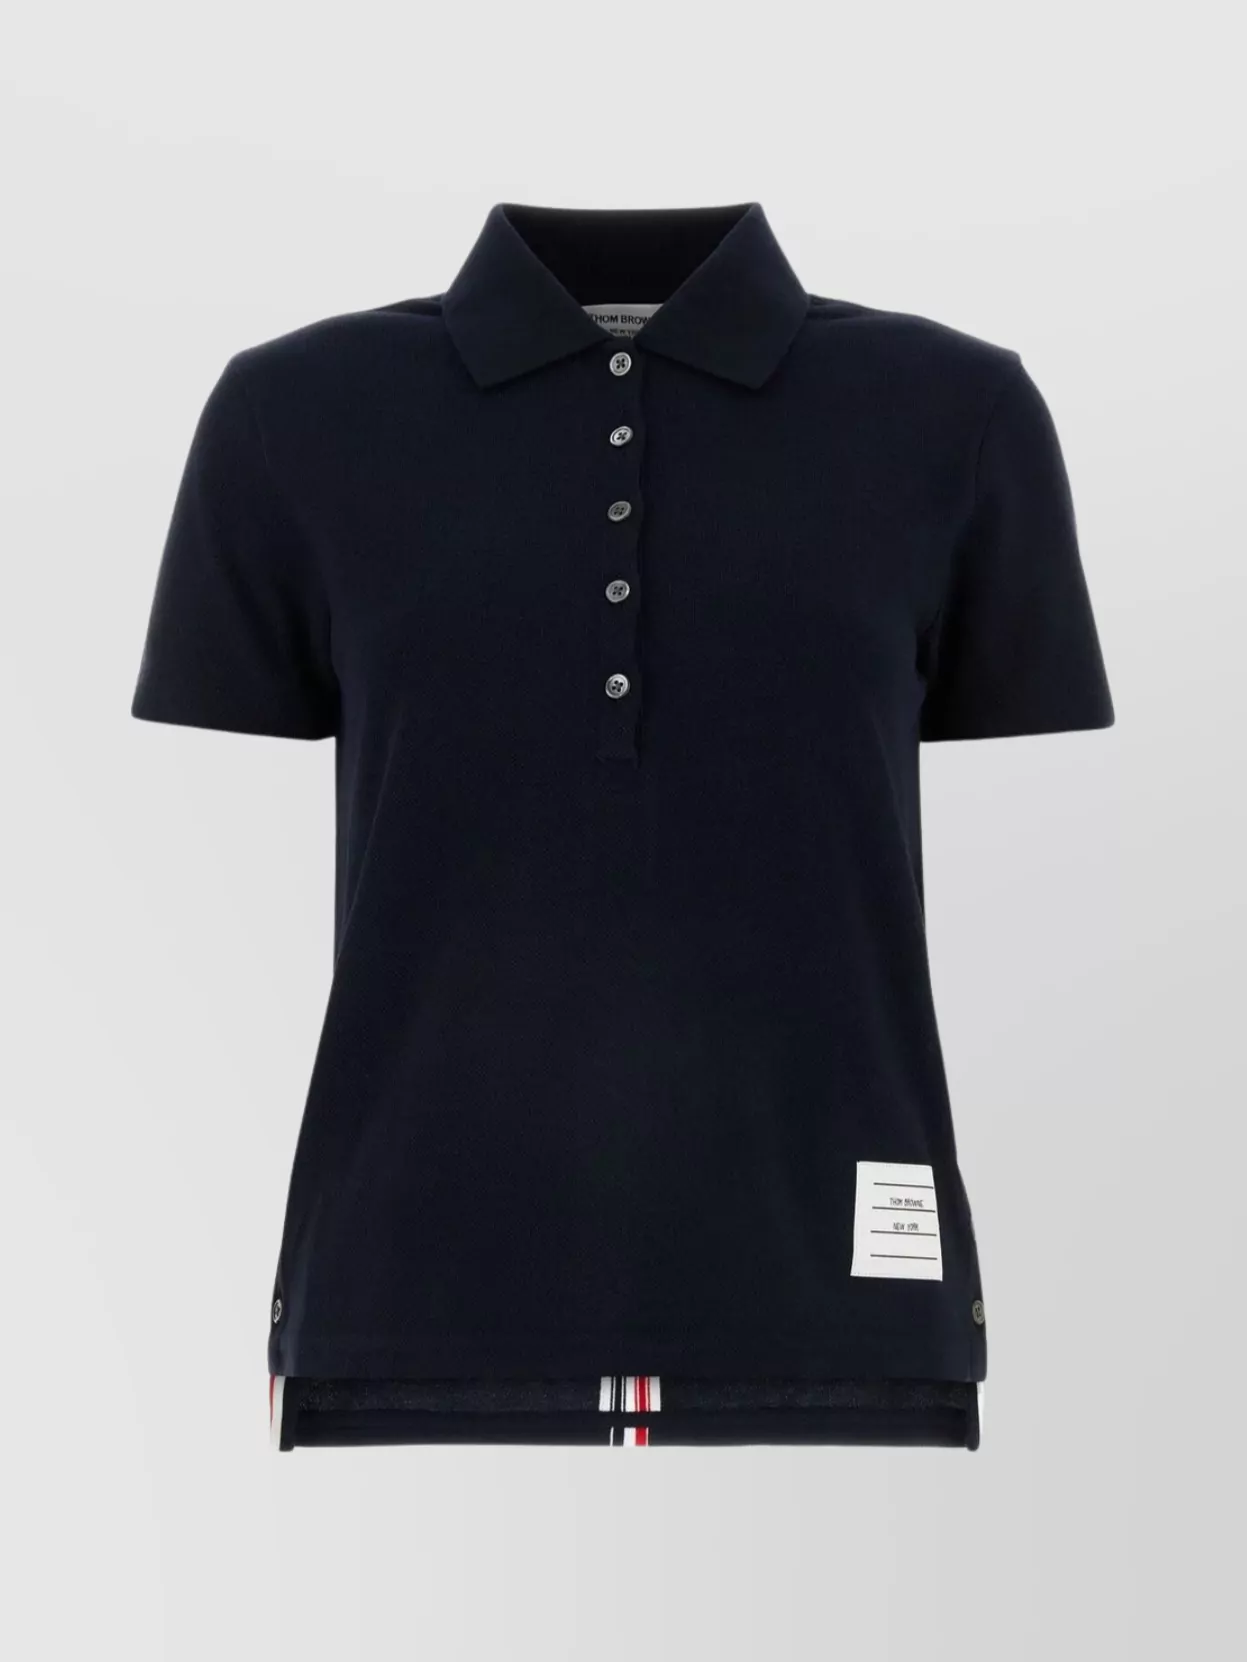 THOM BROWNE PIQUE POLO IN MIDNIGHT BLUE